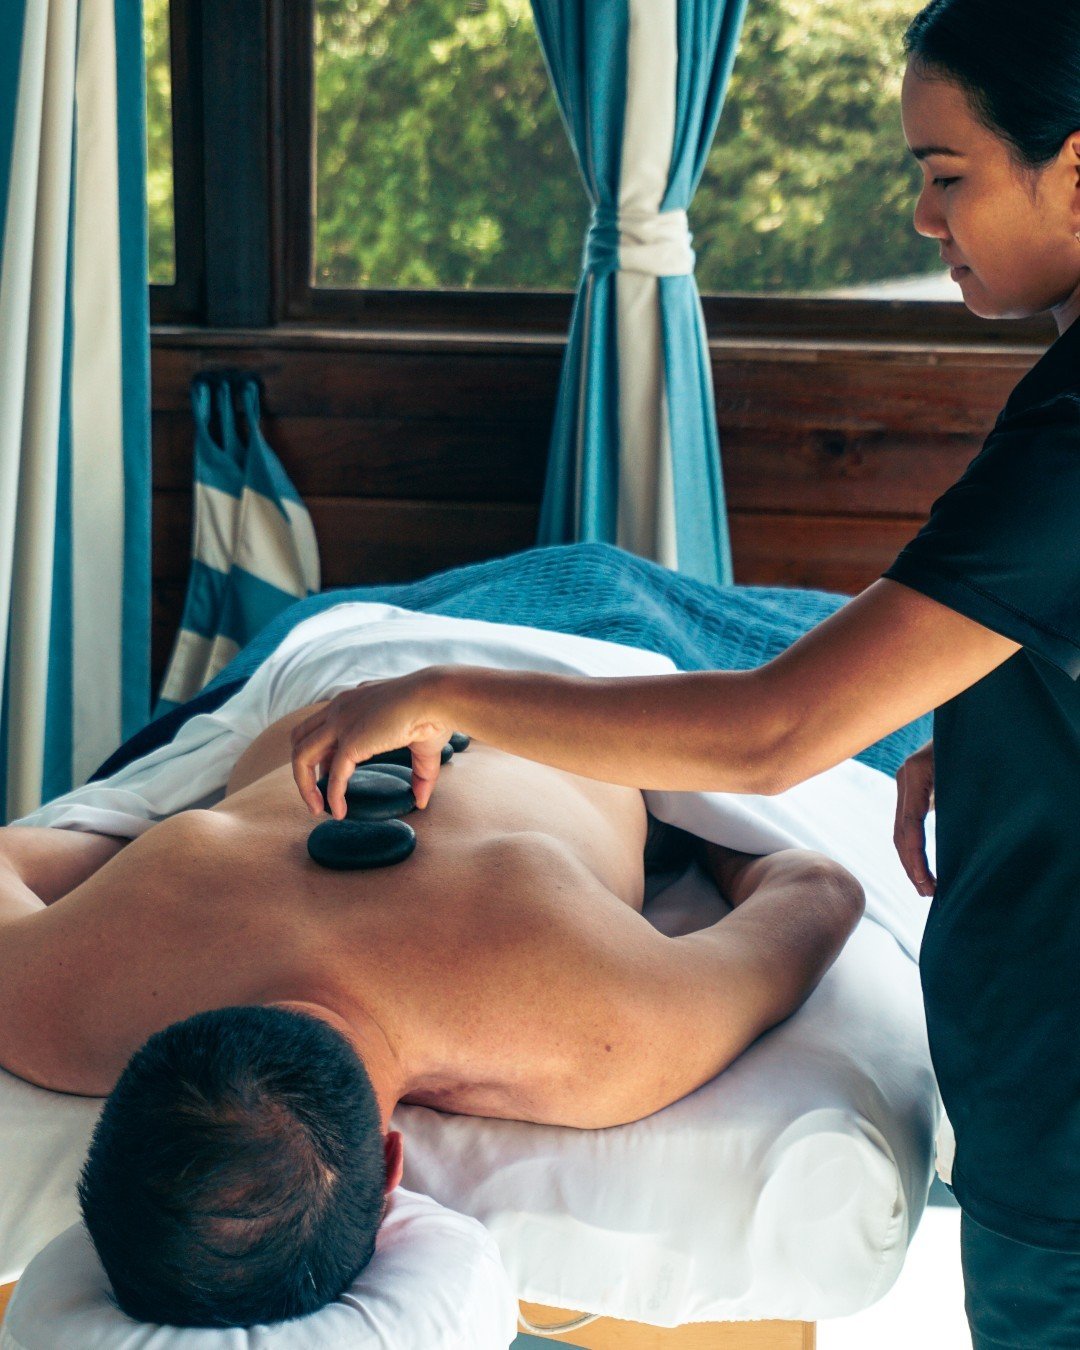 Discover peak relaxation with our LakeHouse River Rock Massage. Using warm stone therapy, a soothing blend of basalt stones and Swedish massage techniques.

The the deep warmth activates your muscles, providing deep tissue relief and revitalization. 